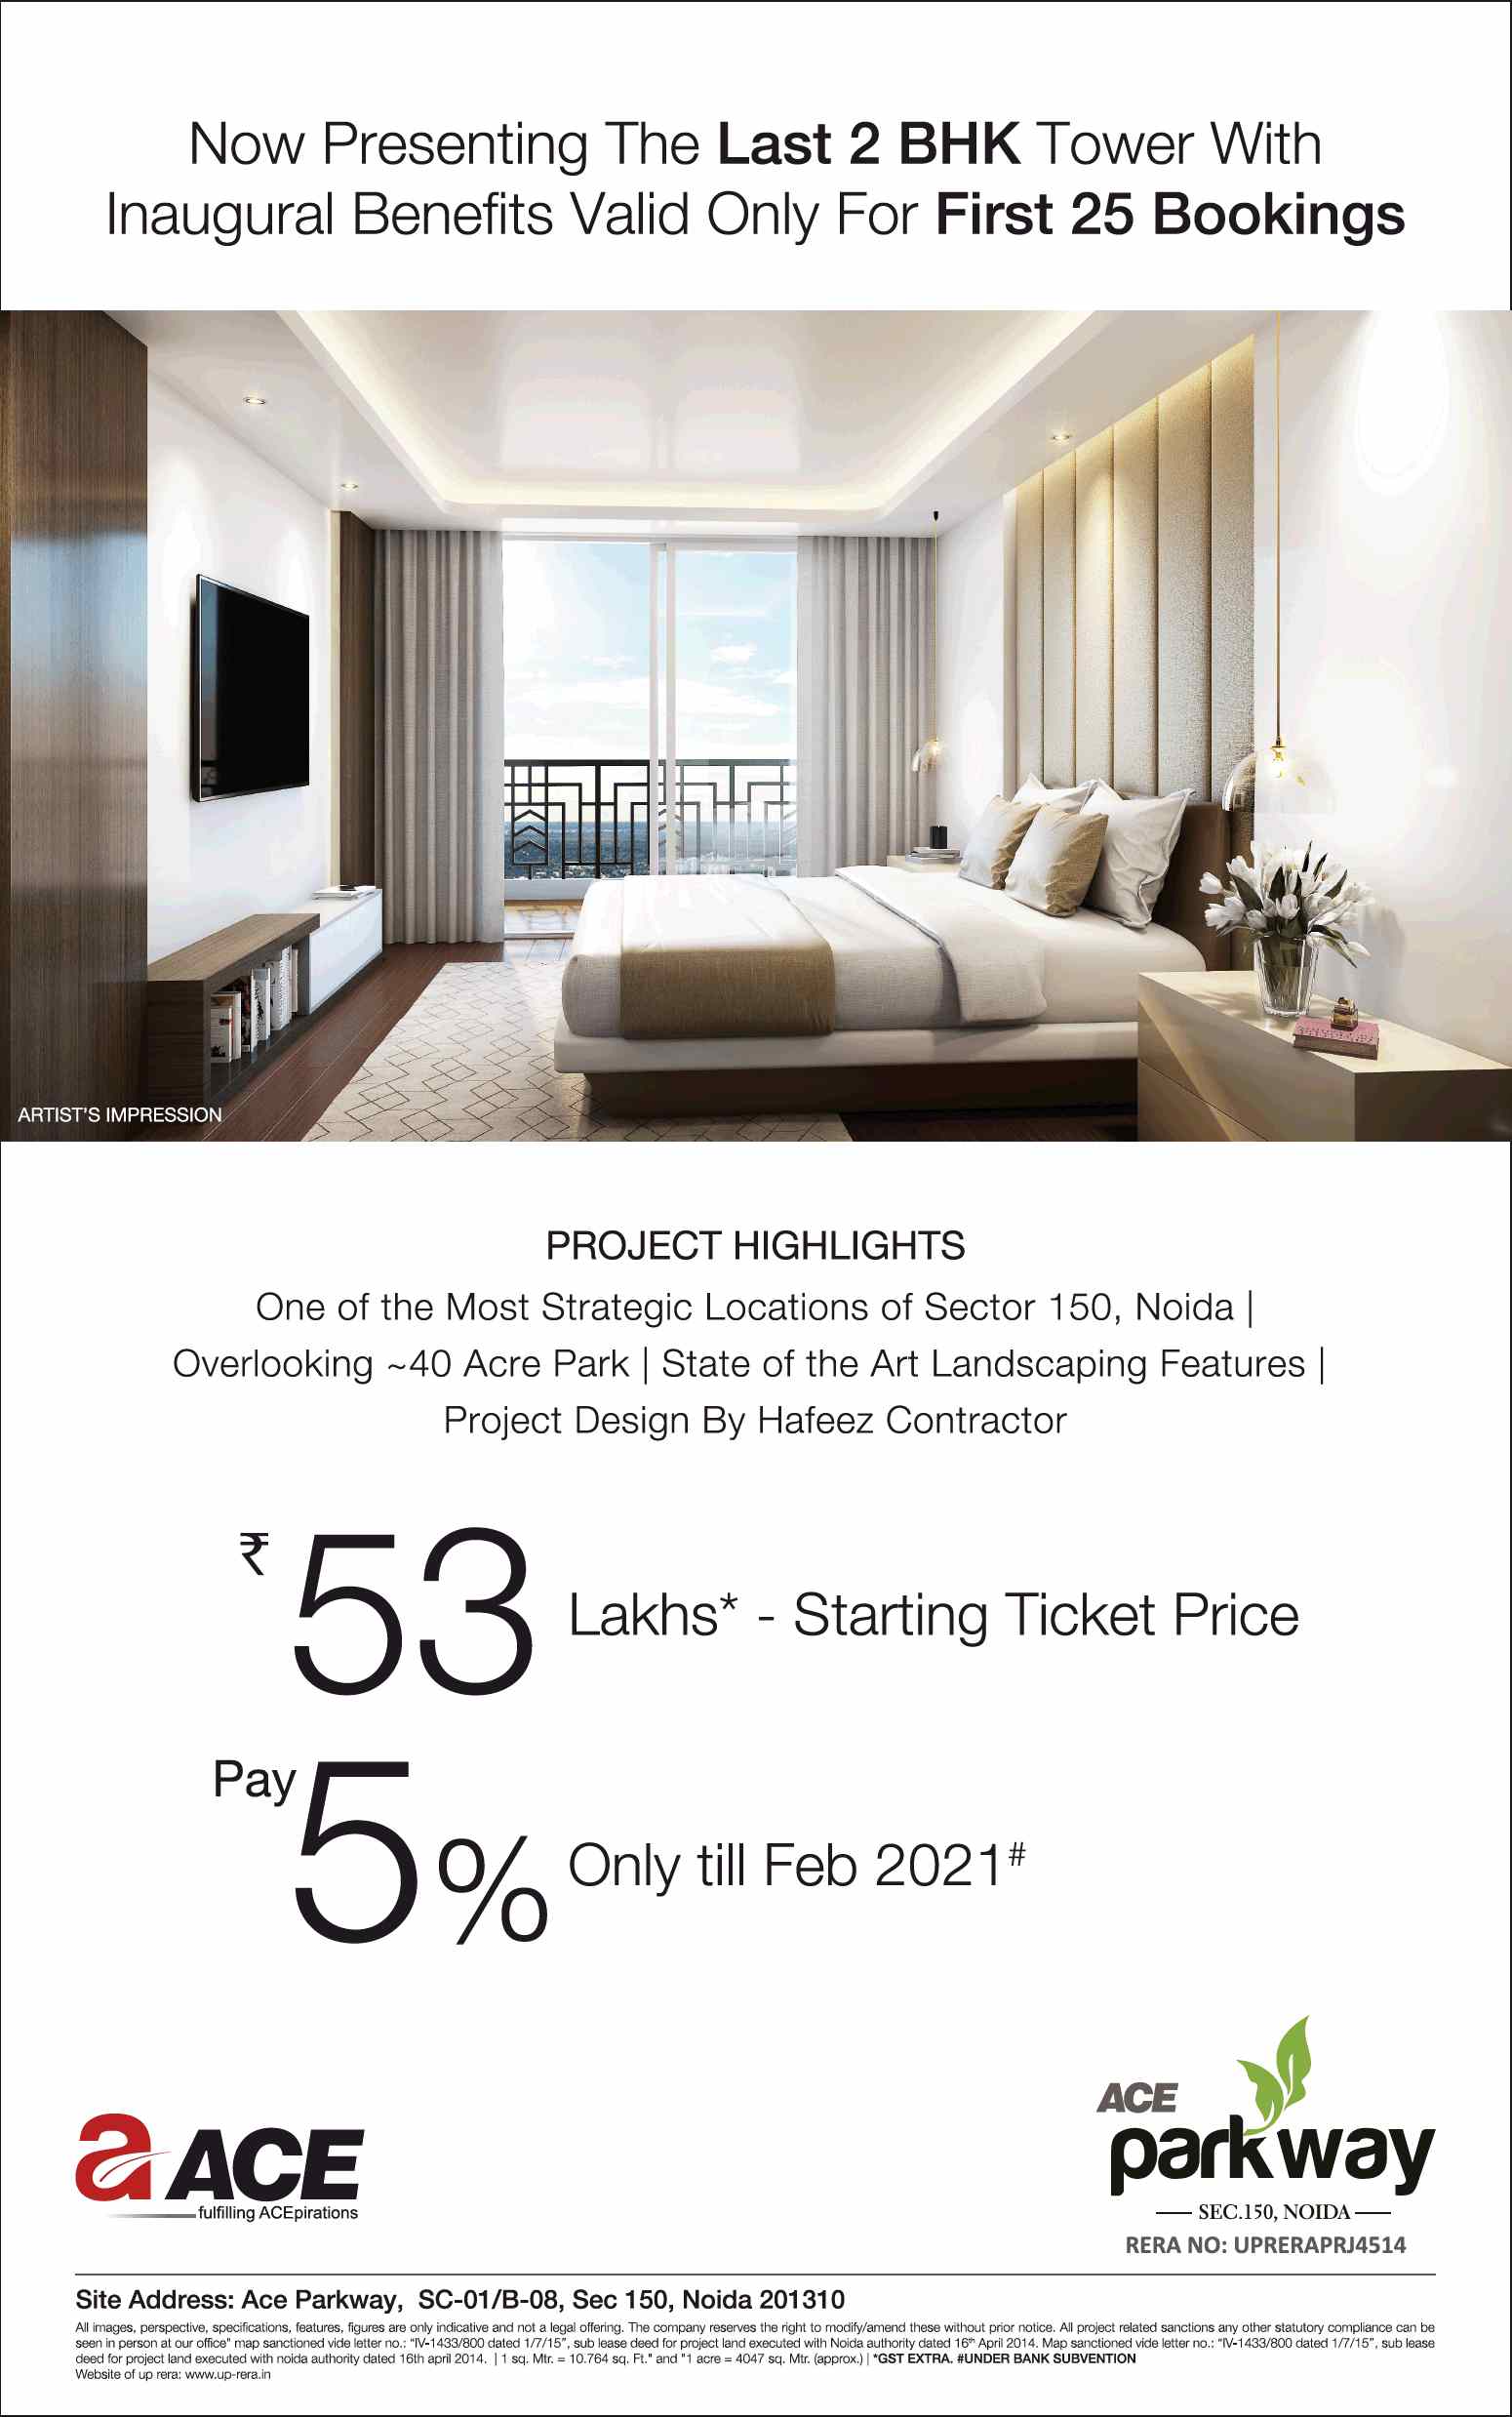 Pay 5% only till Feb 2021 at Ace Parkway in Noida Update